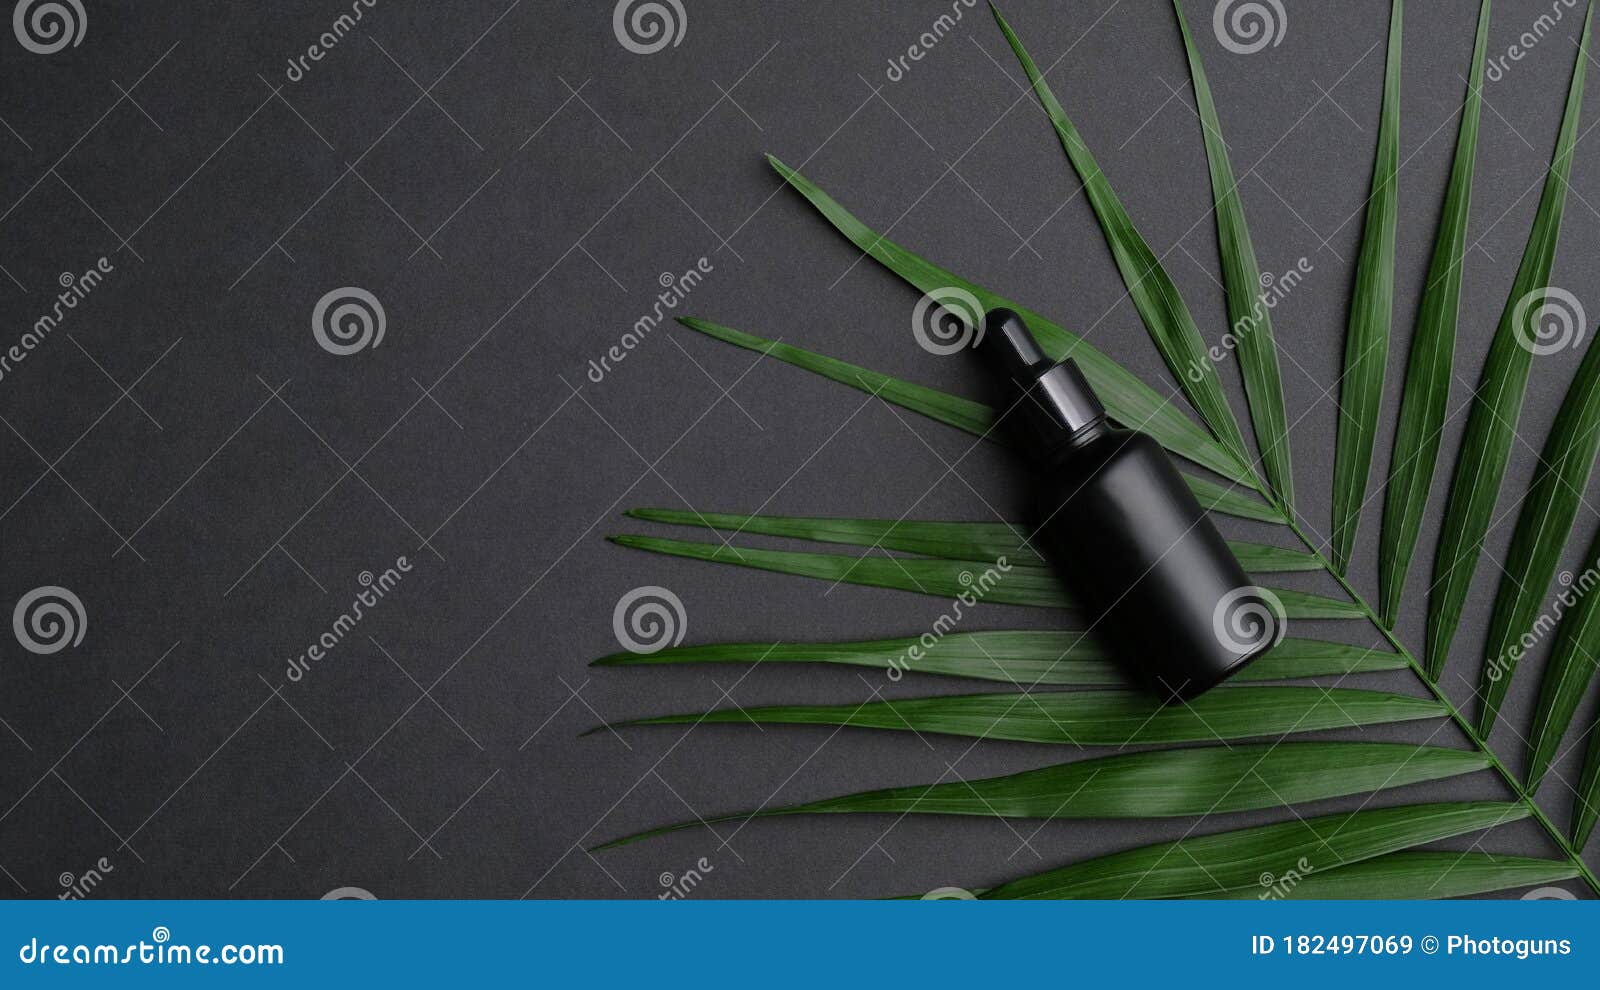 Free 2006+ Oil Dropper Mockup Yellowimages Mockups